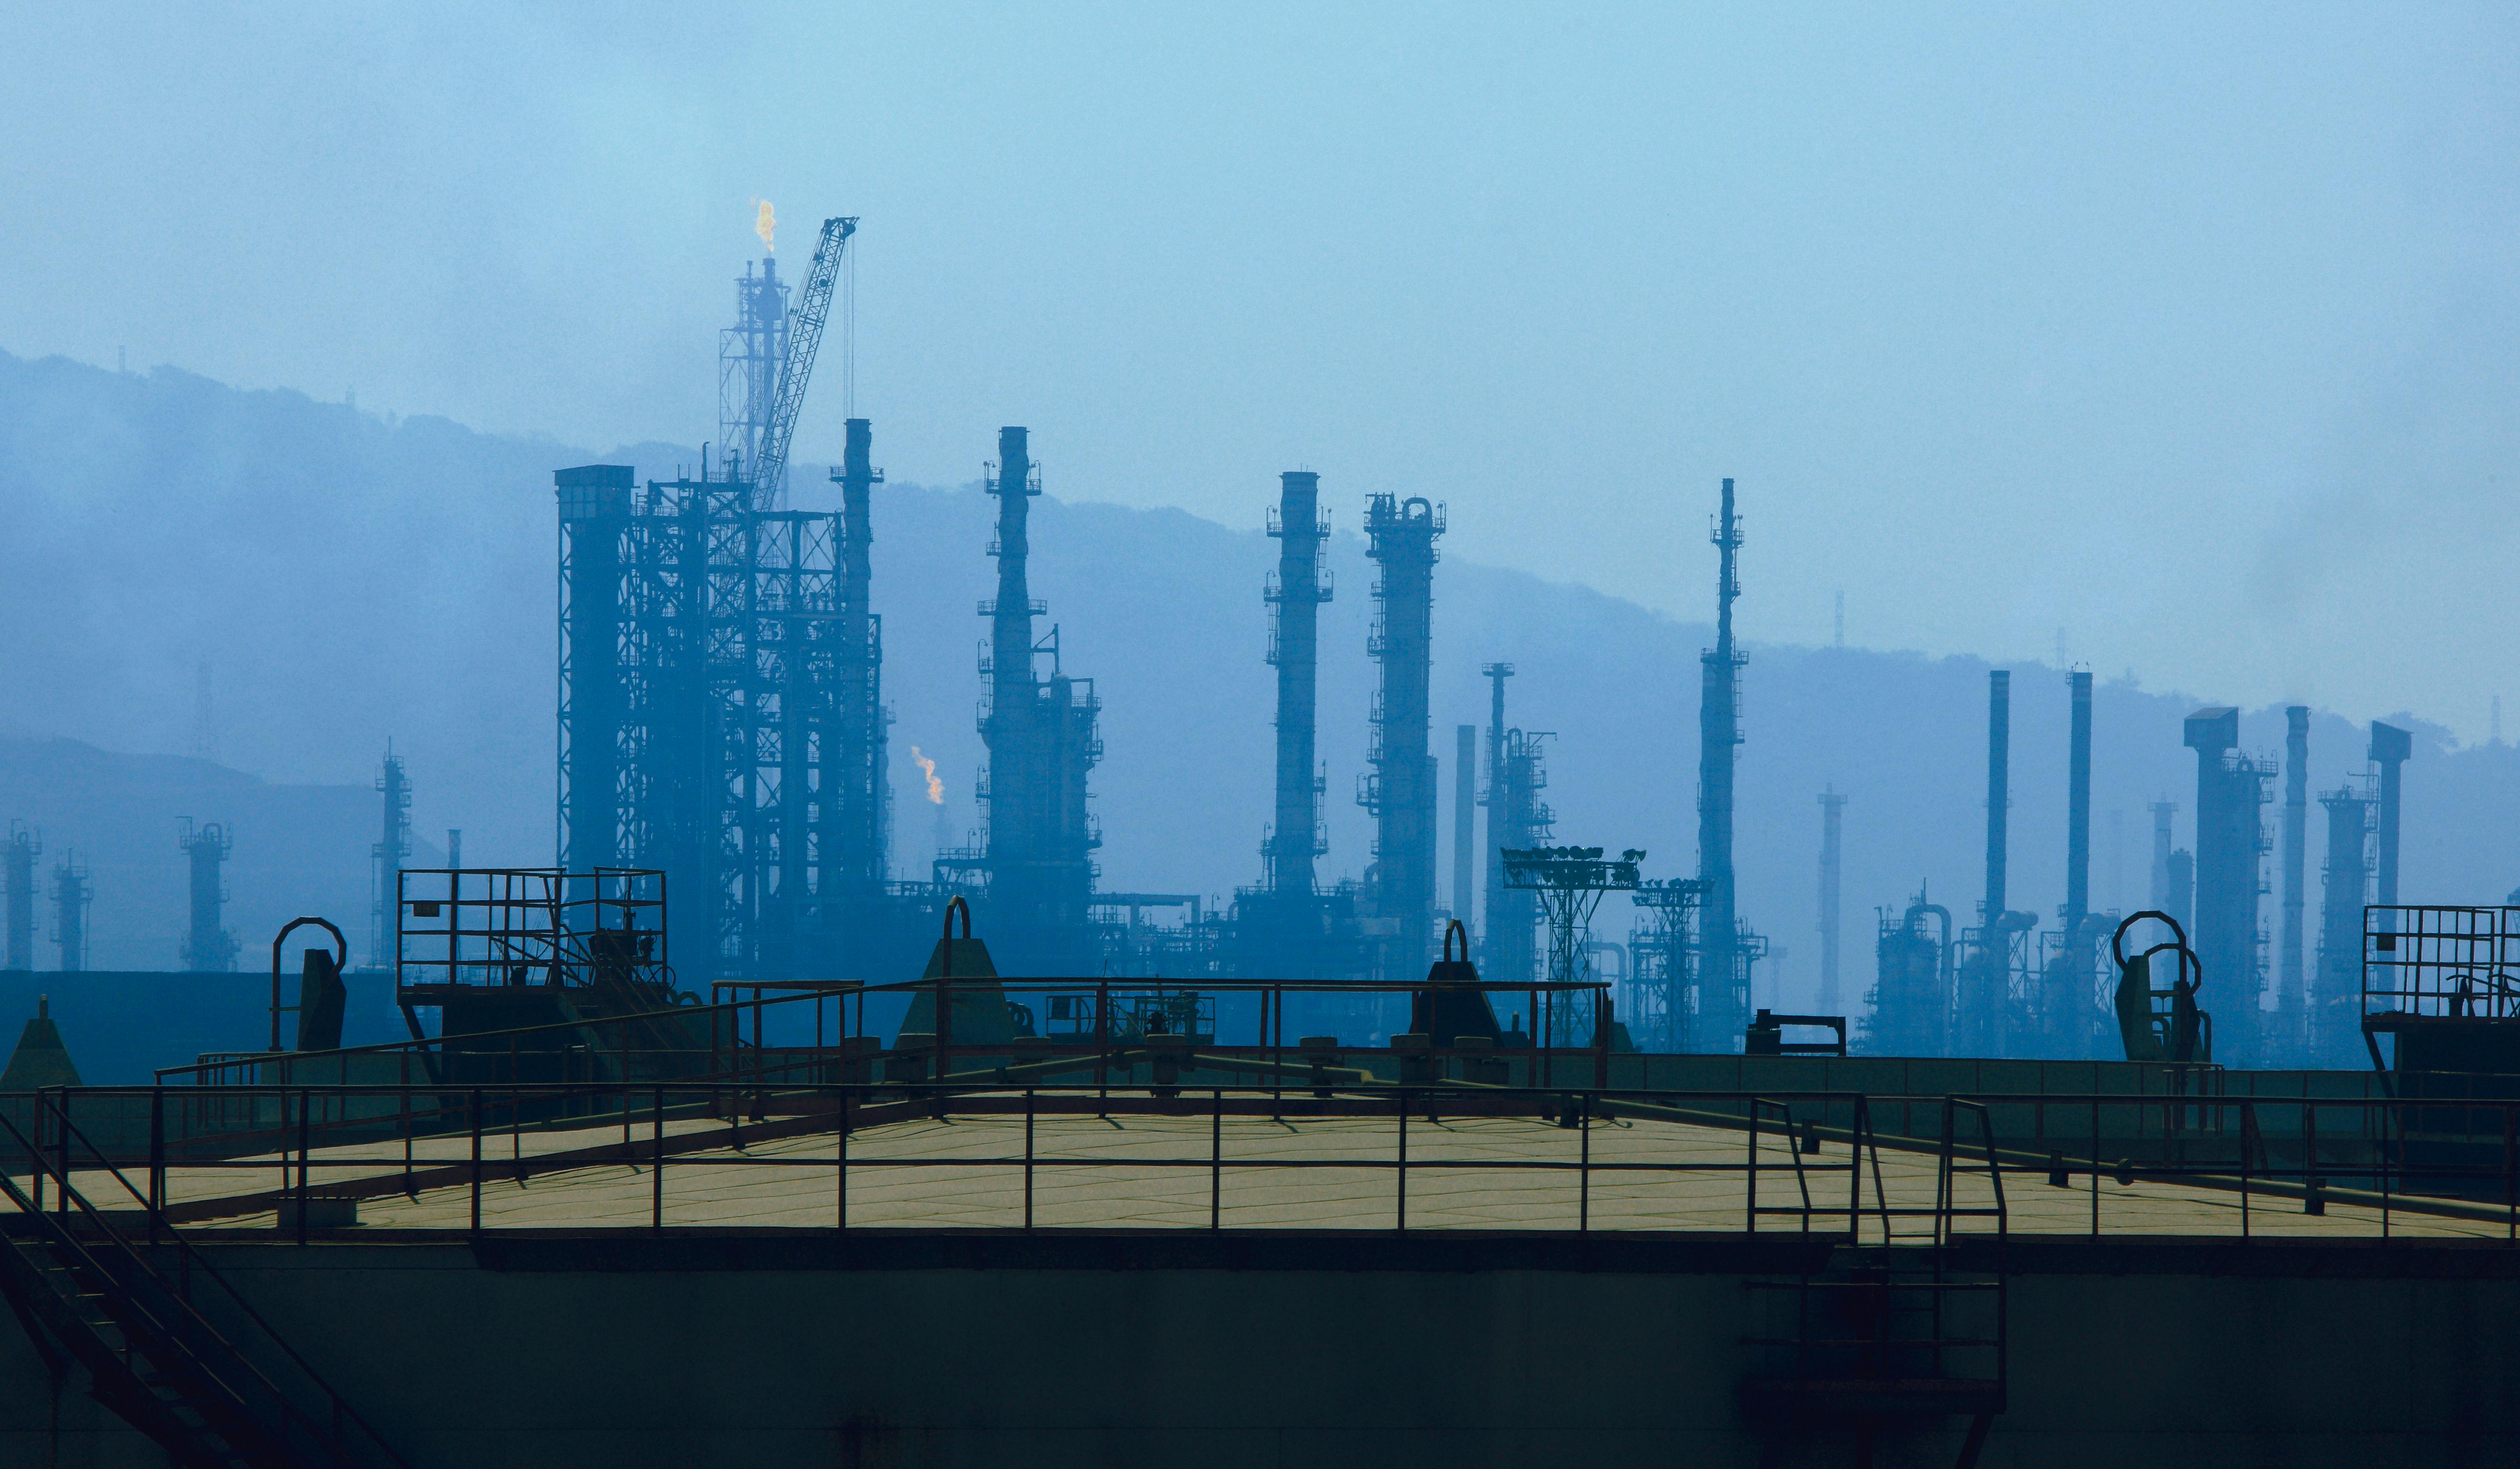 Photo depicts Mumbai,Maharashtra,India,March, 03,2009: Silhouette showing cluster of tall chimneys,columns,towers,flare stacks, storage tanks,of petroleum